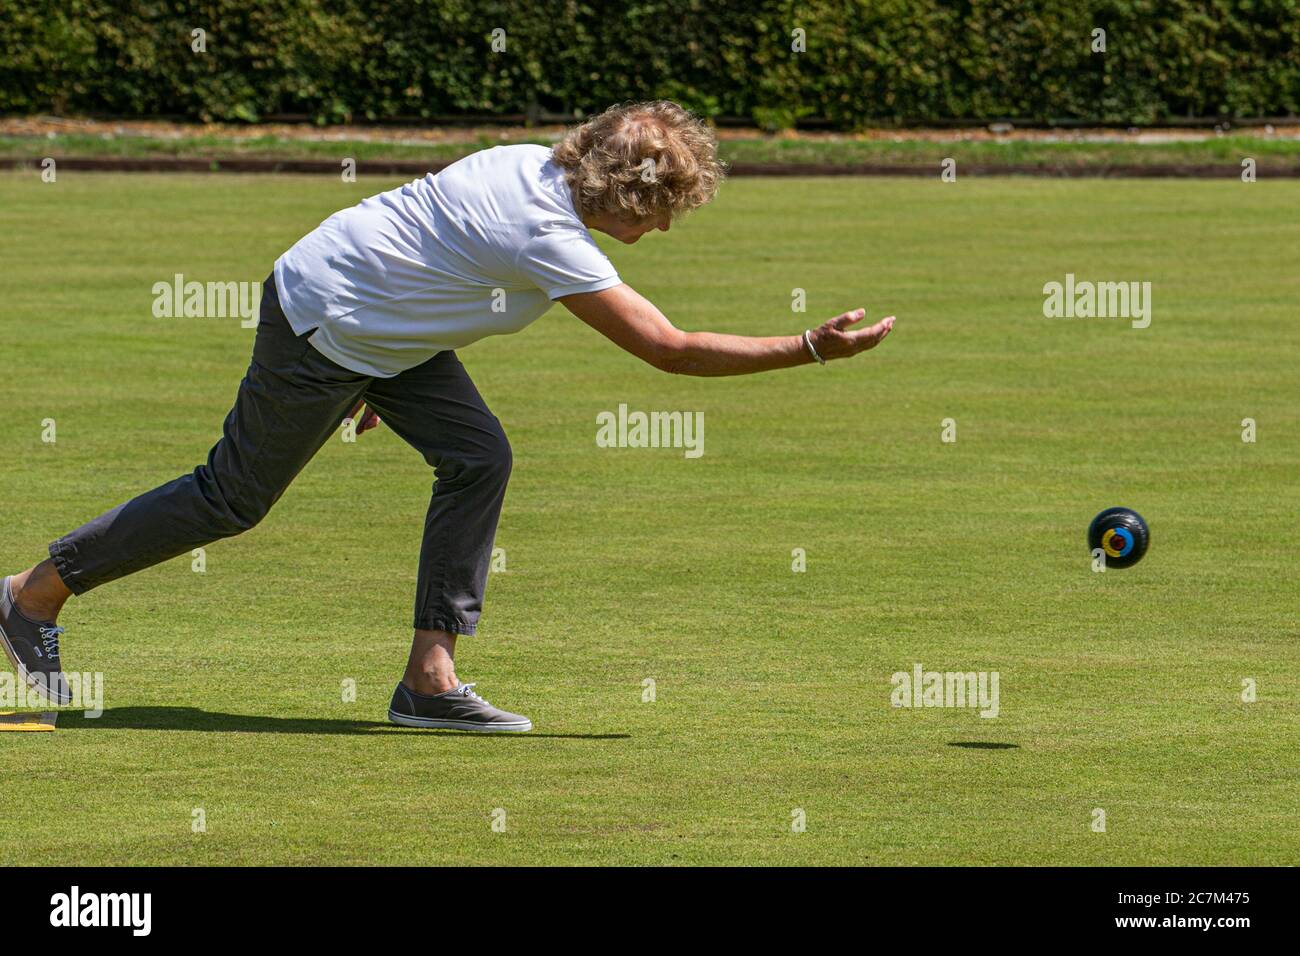 WIMBLEDON LONDON UK. 18th July, 2020. Members of the Wimbledon Park Bowls Club enjoy bowling outdoors on a hot summer day as lockdown restrictions are lifted and sport facilities reopen.Credit: amer ghazzal/Alamy Live News Stock Photo